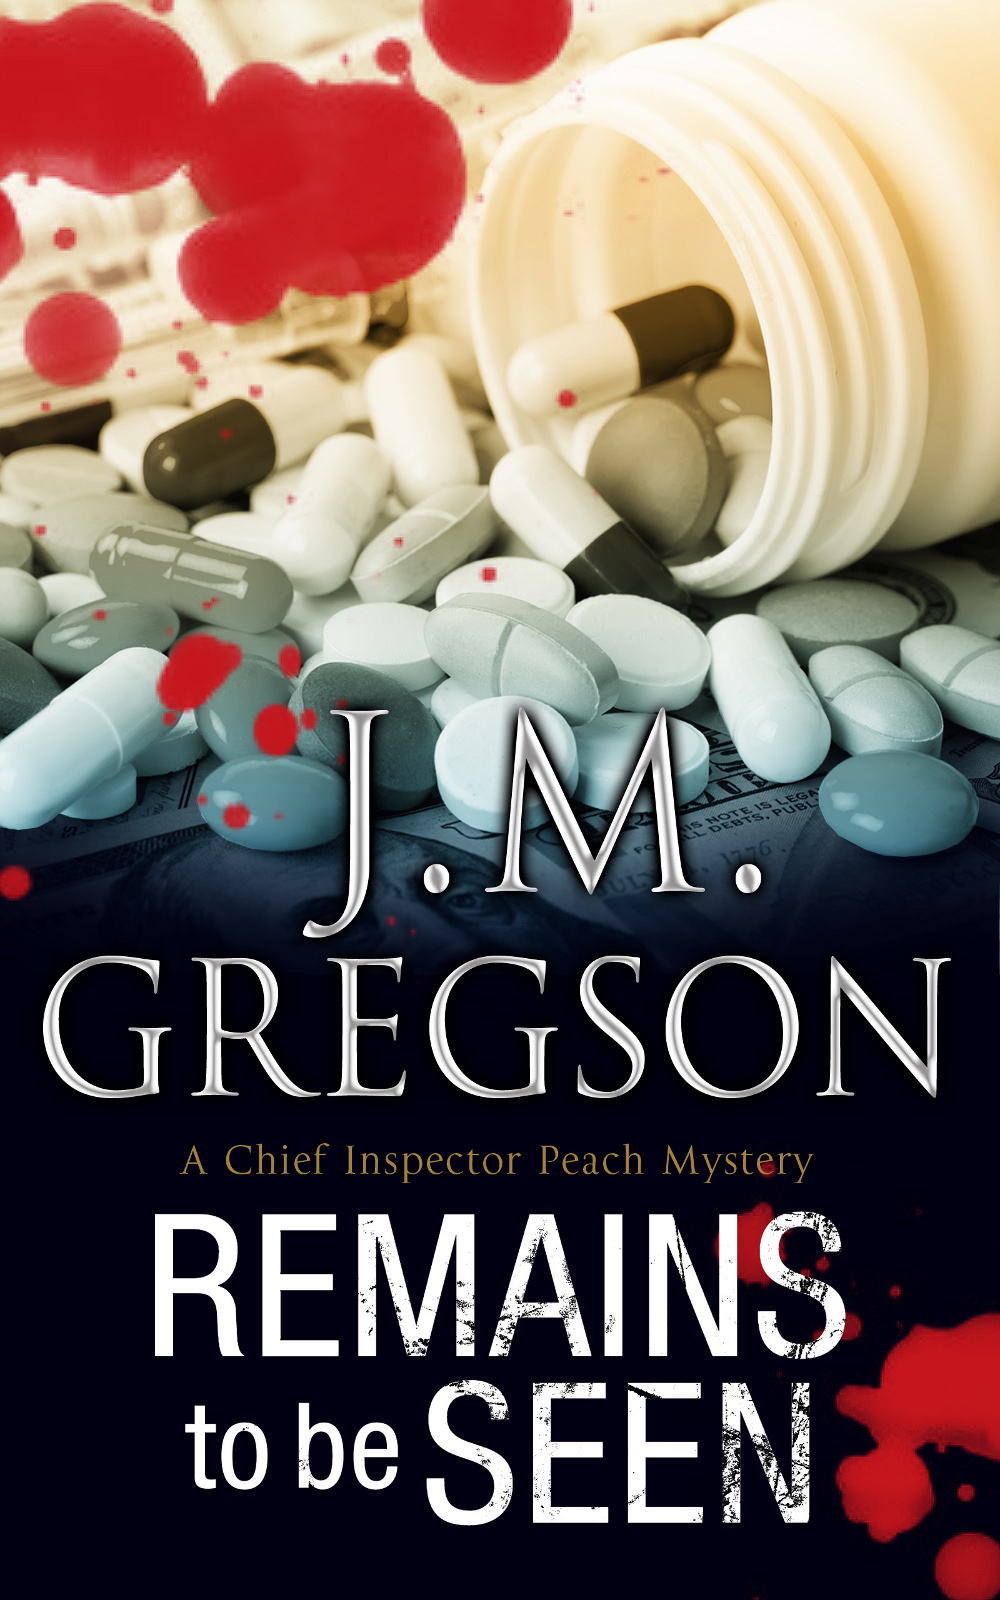 Remains to be Seen (2015) by J.M. Gregson